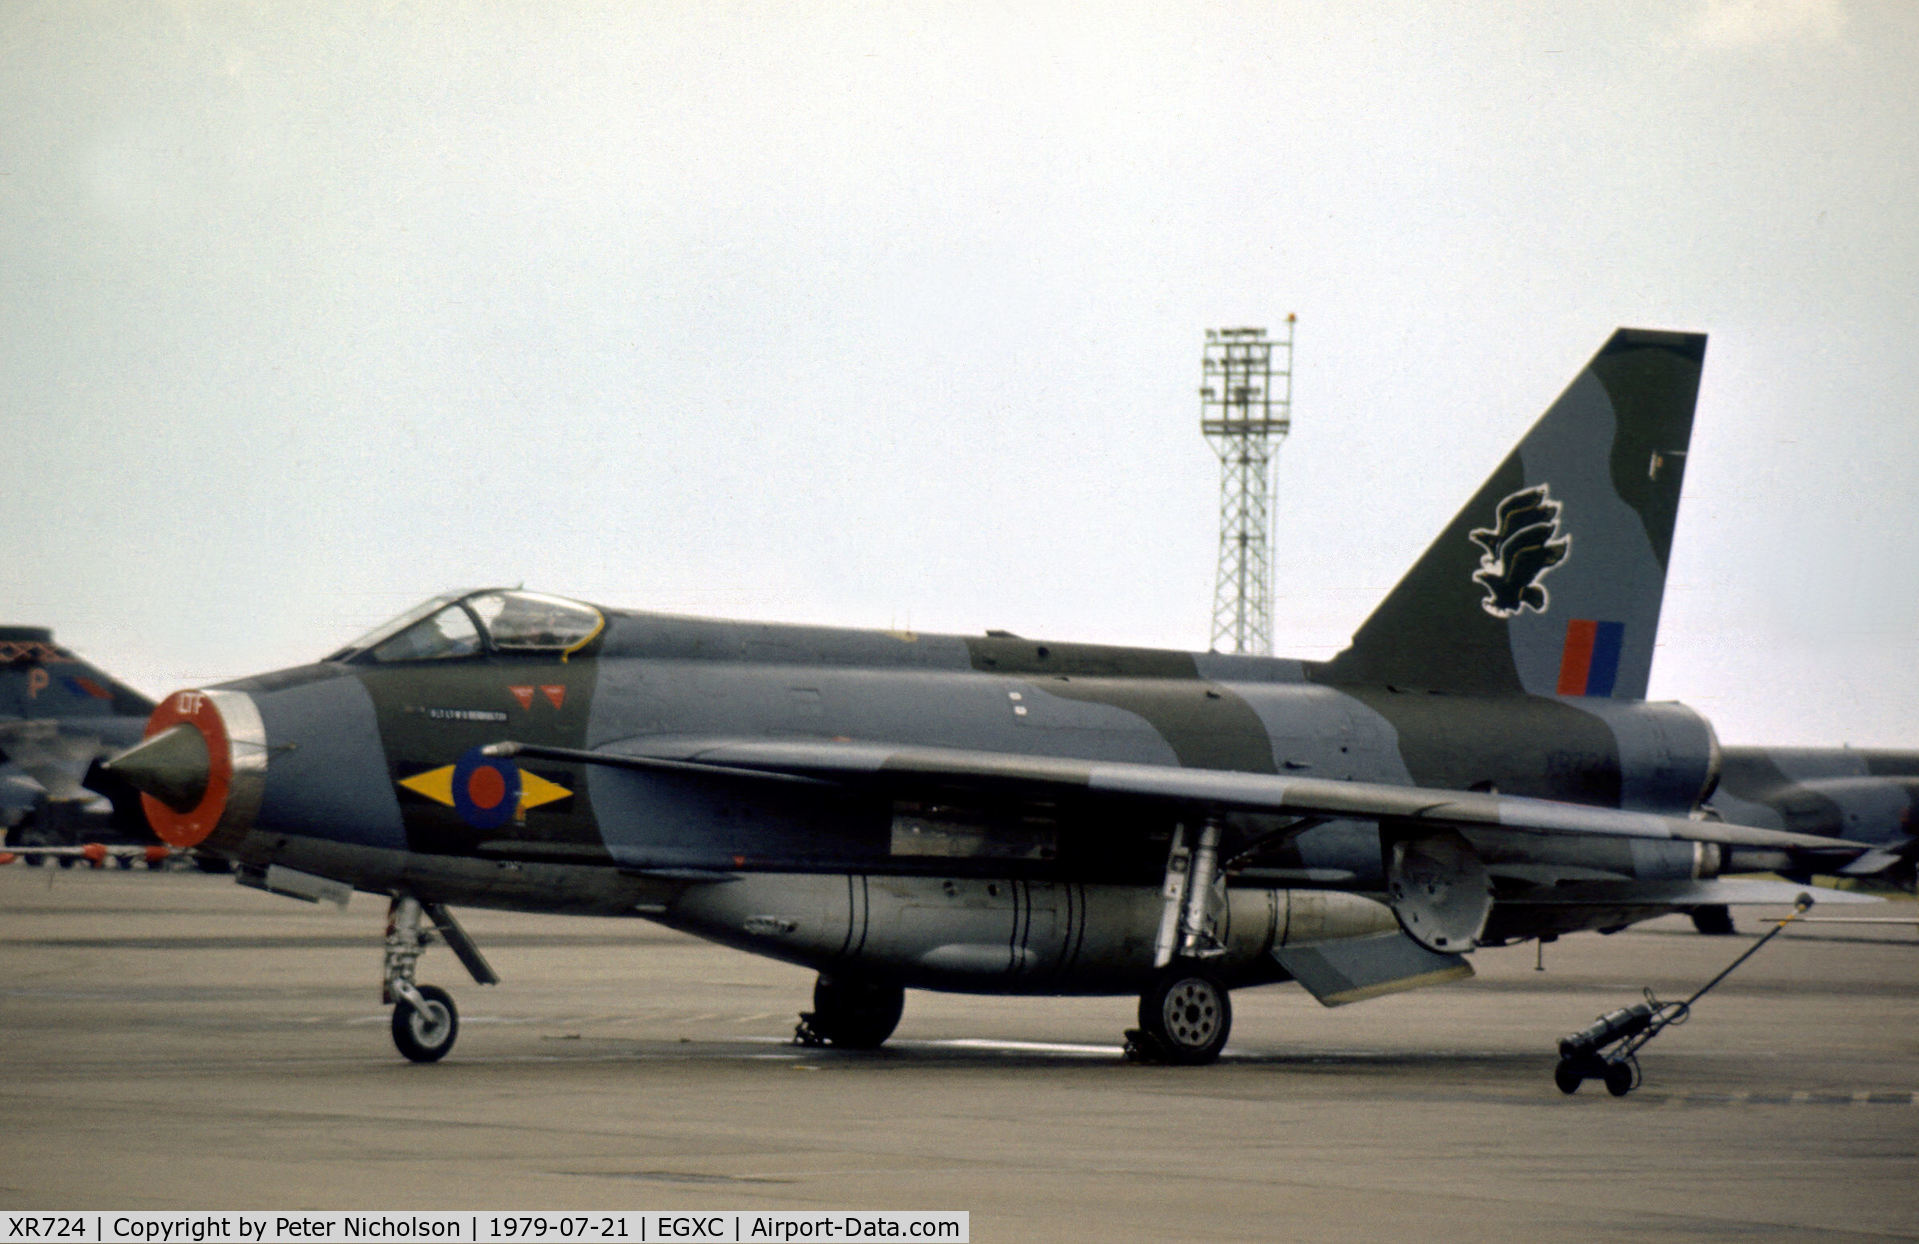 XR724, 1965 English Electric Lightning F.6 C/N 95207, Lightning F.6 of 11 Squadron on the flight line at the 1979 RAF Coningsby Airshow.